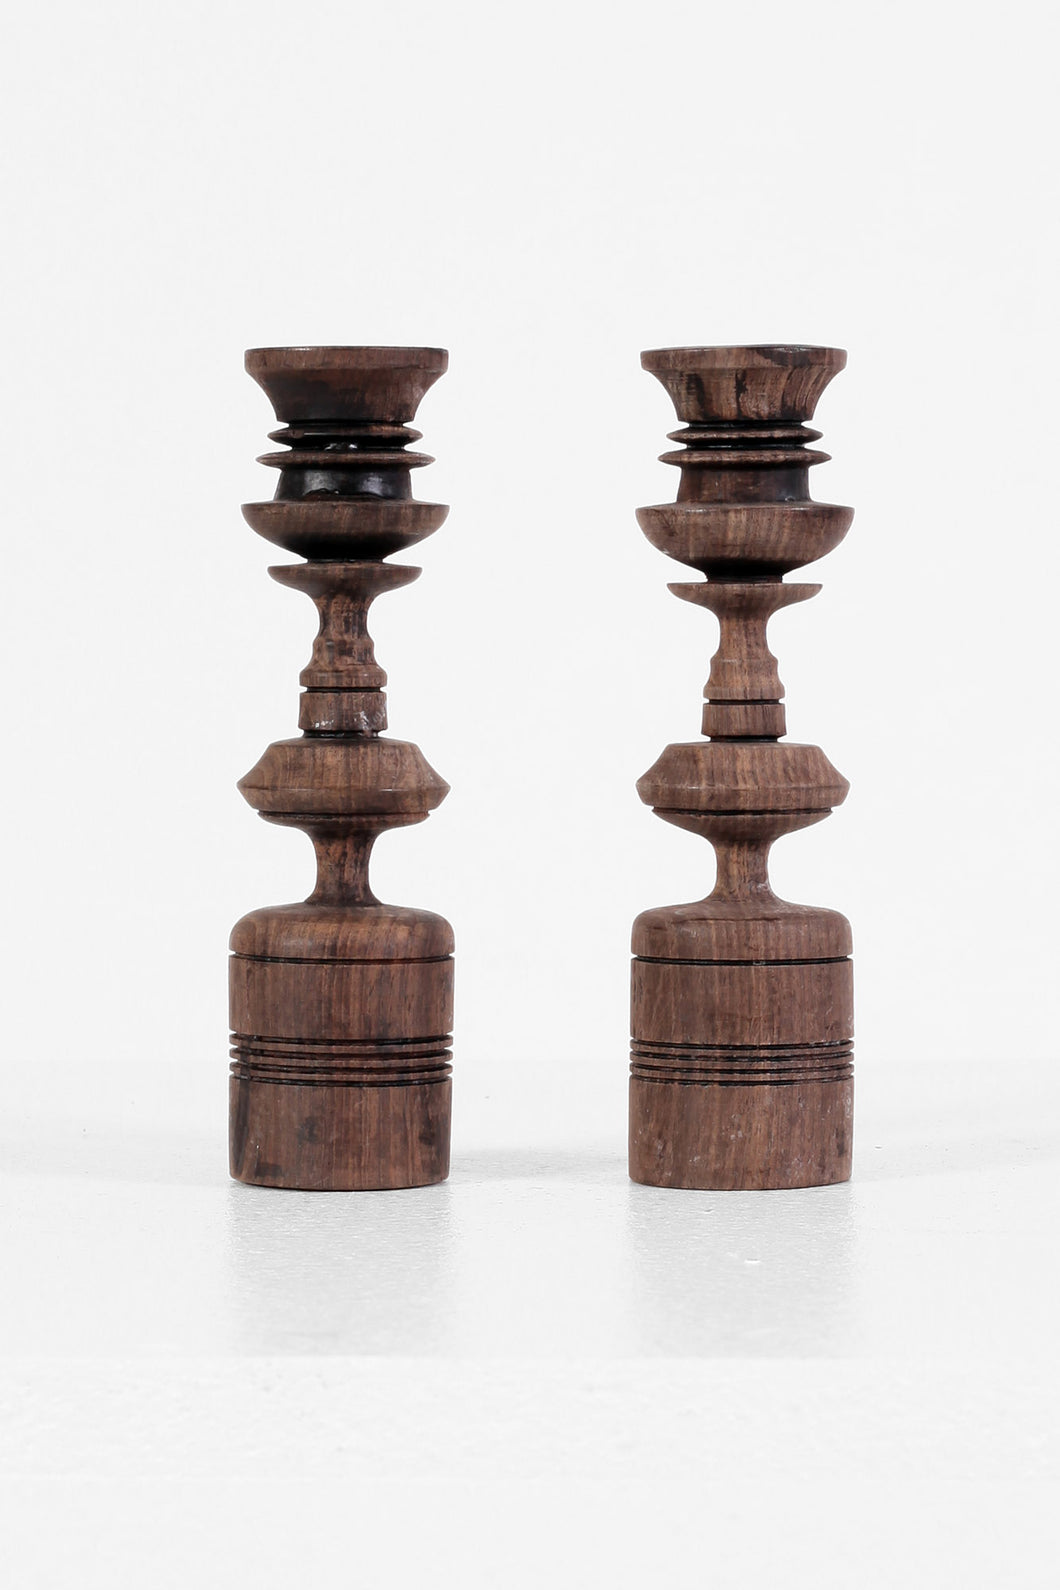 Pair of Hand-carved Candle Sticks